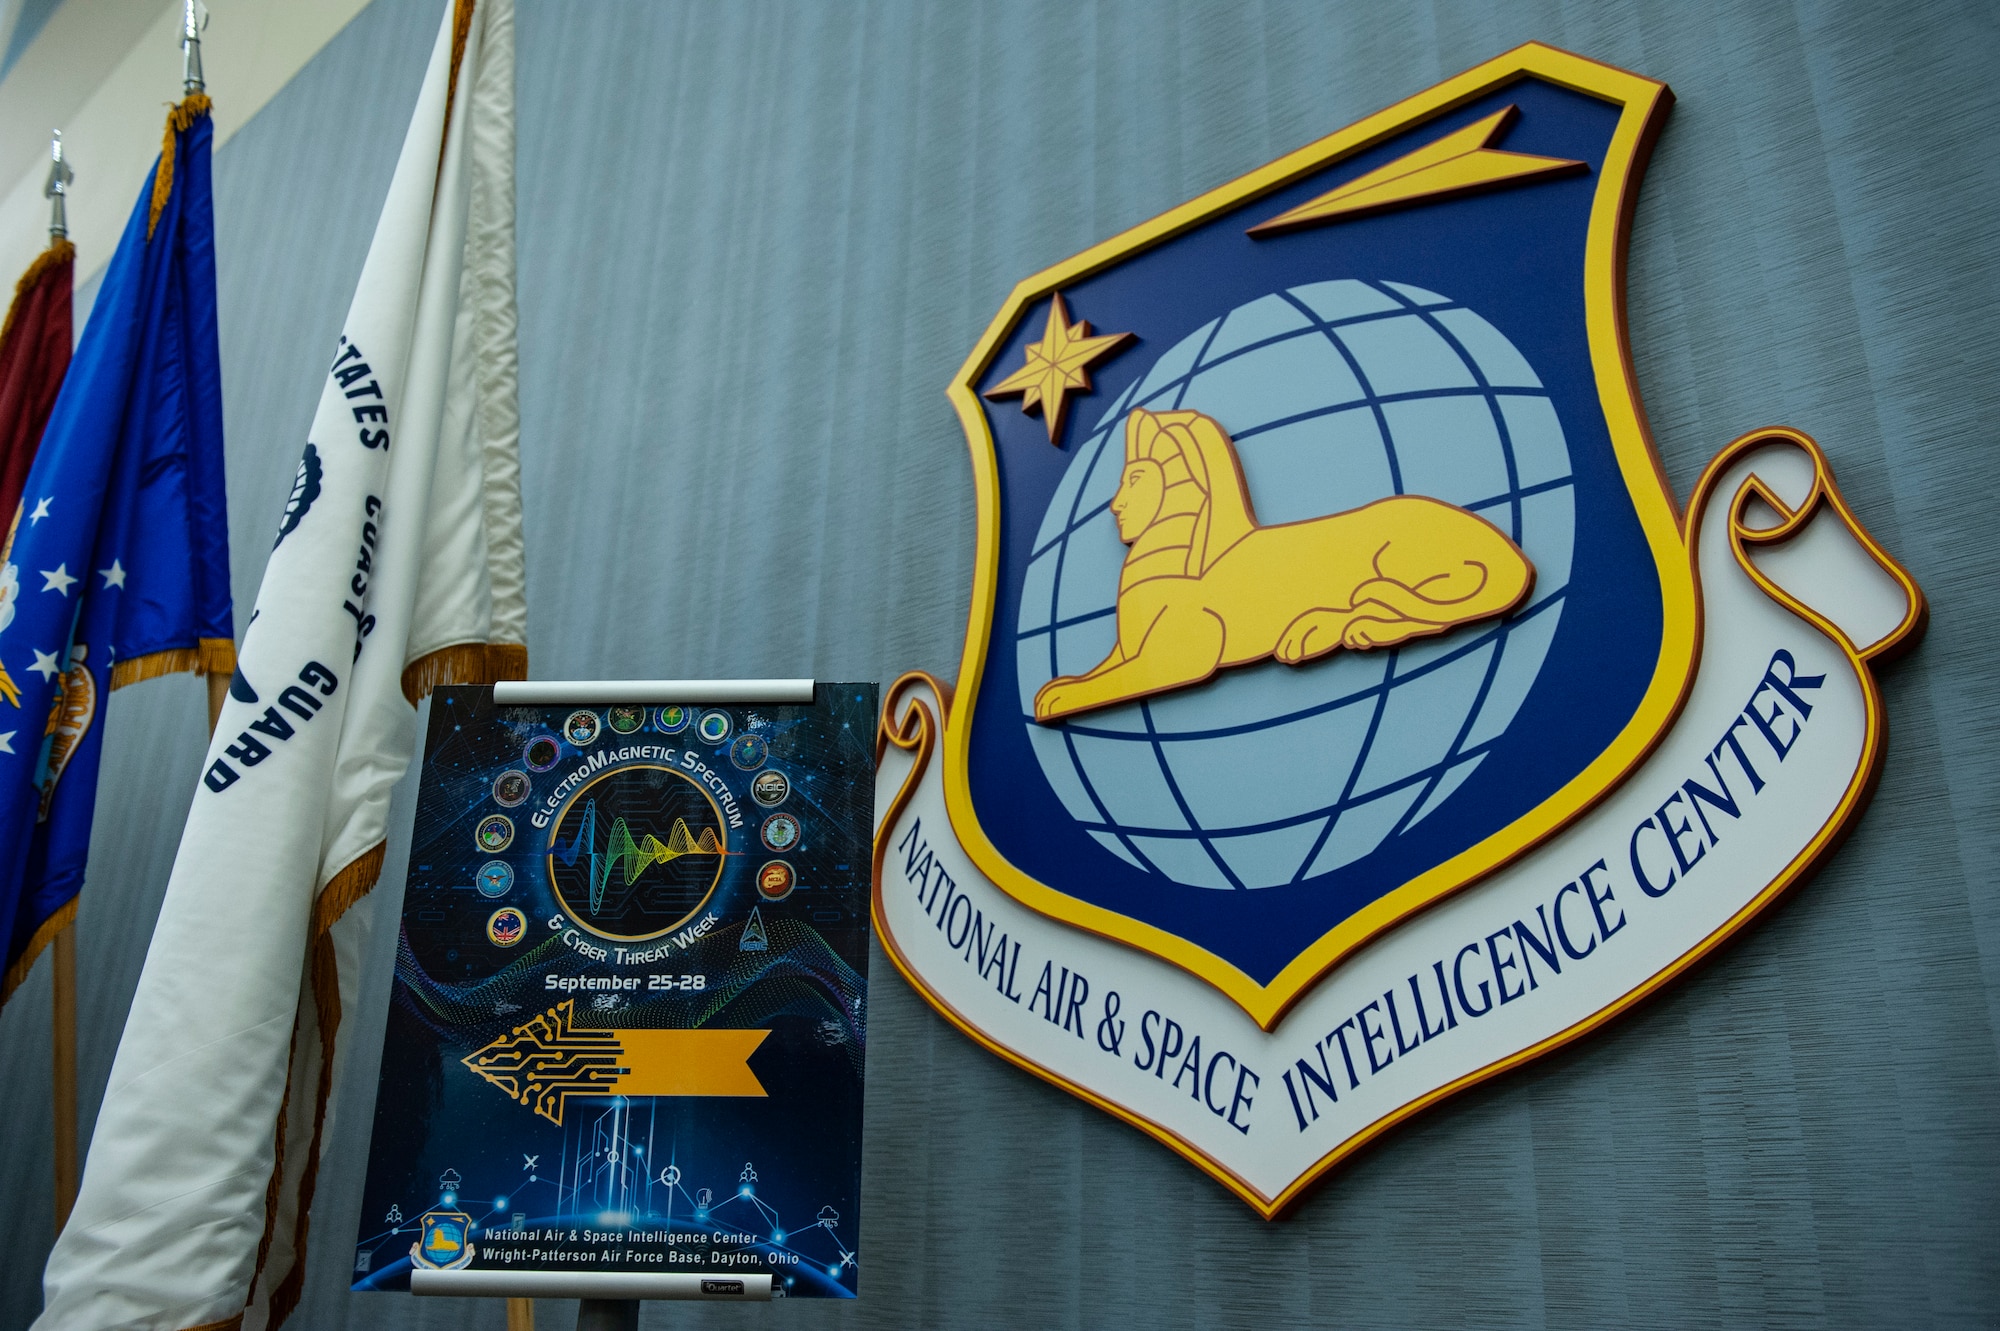 An Electromagnetic Spectrum and Cyber Threat Week poster is displayed near the entrance to the auditorium at the National Air and Space Intelligence Center, Wright-Patterson Air Force Base, Ohio, Sept. 25, 2023. The week-long event was designed to enhance joint force readiness in electromagnetic spectrum operations and cyber capabilities.